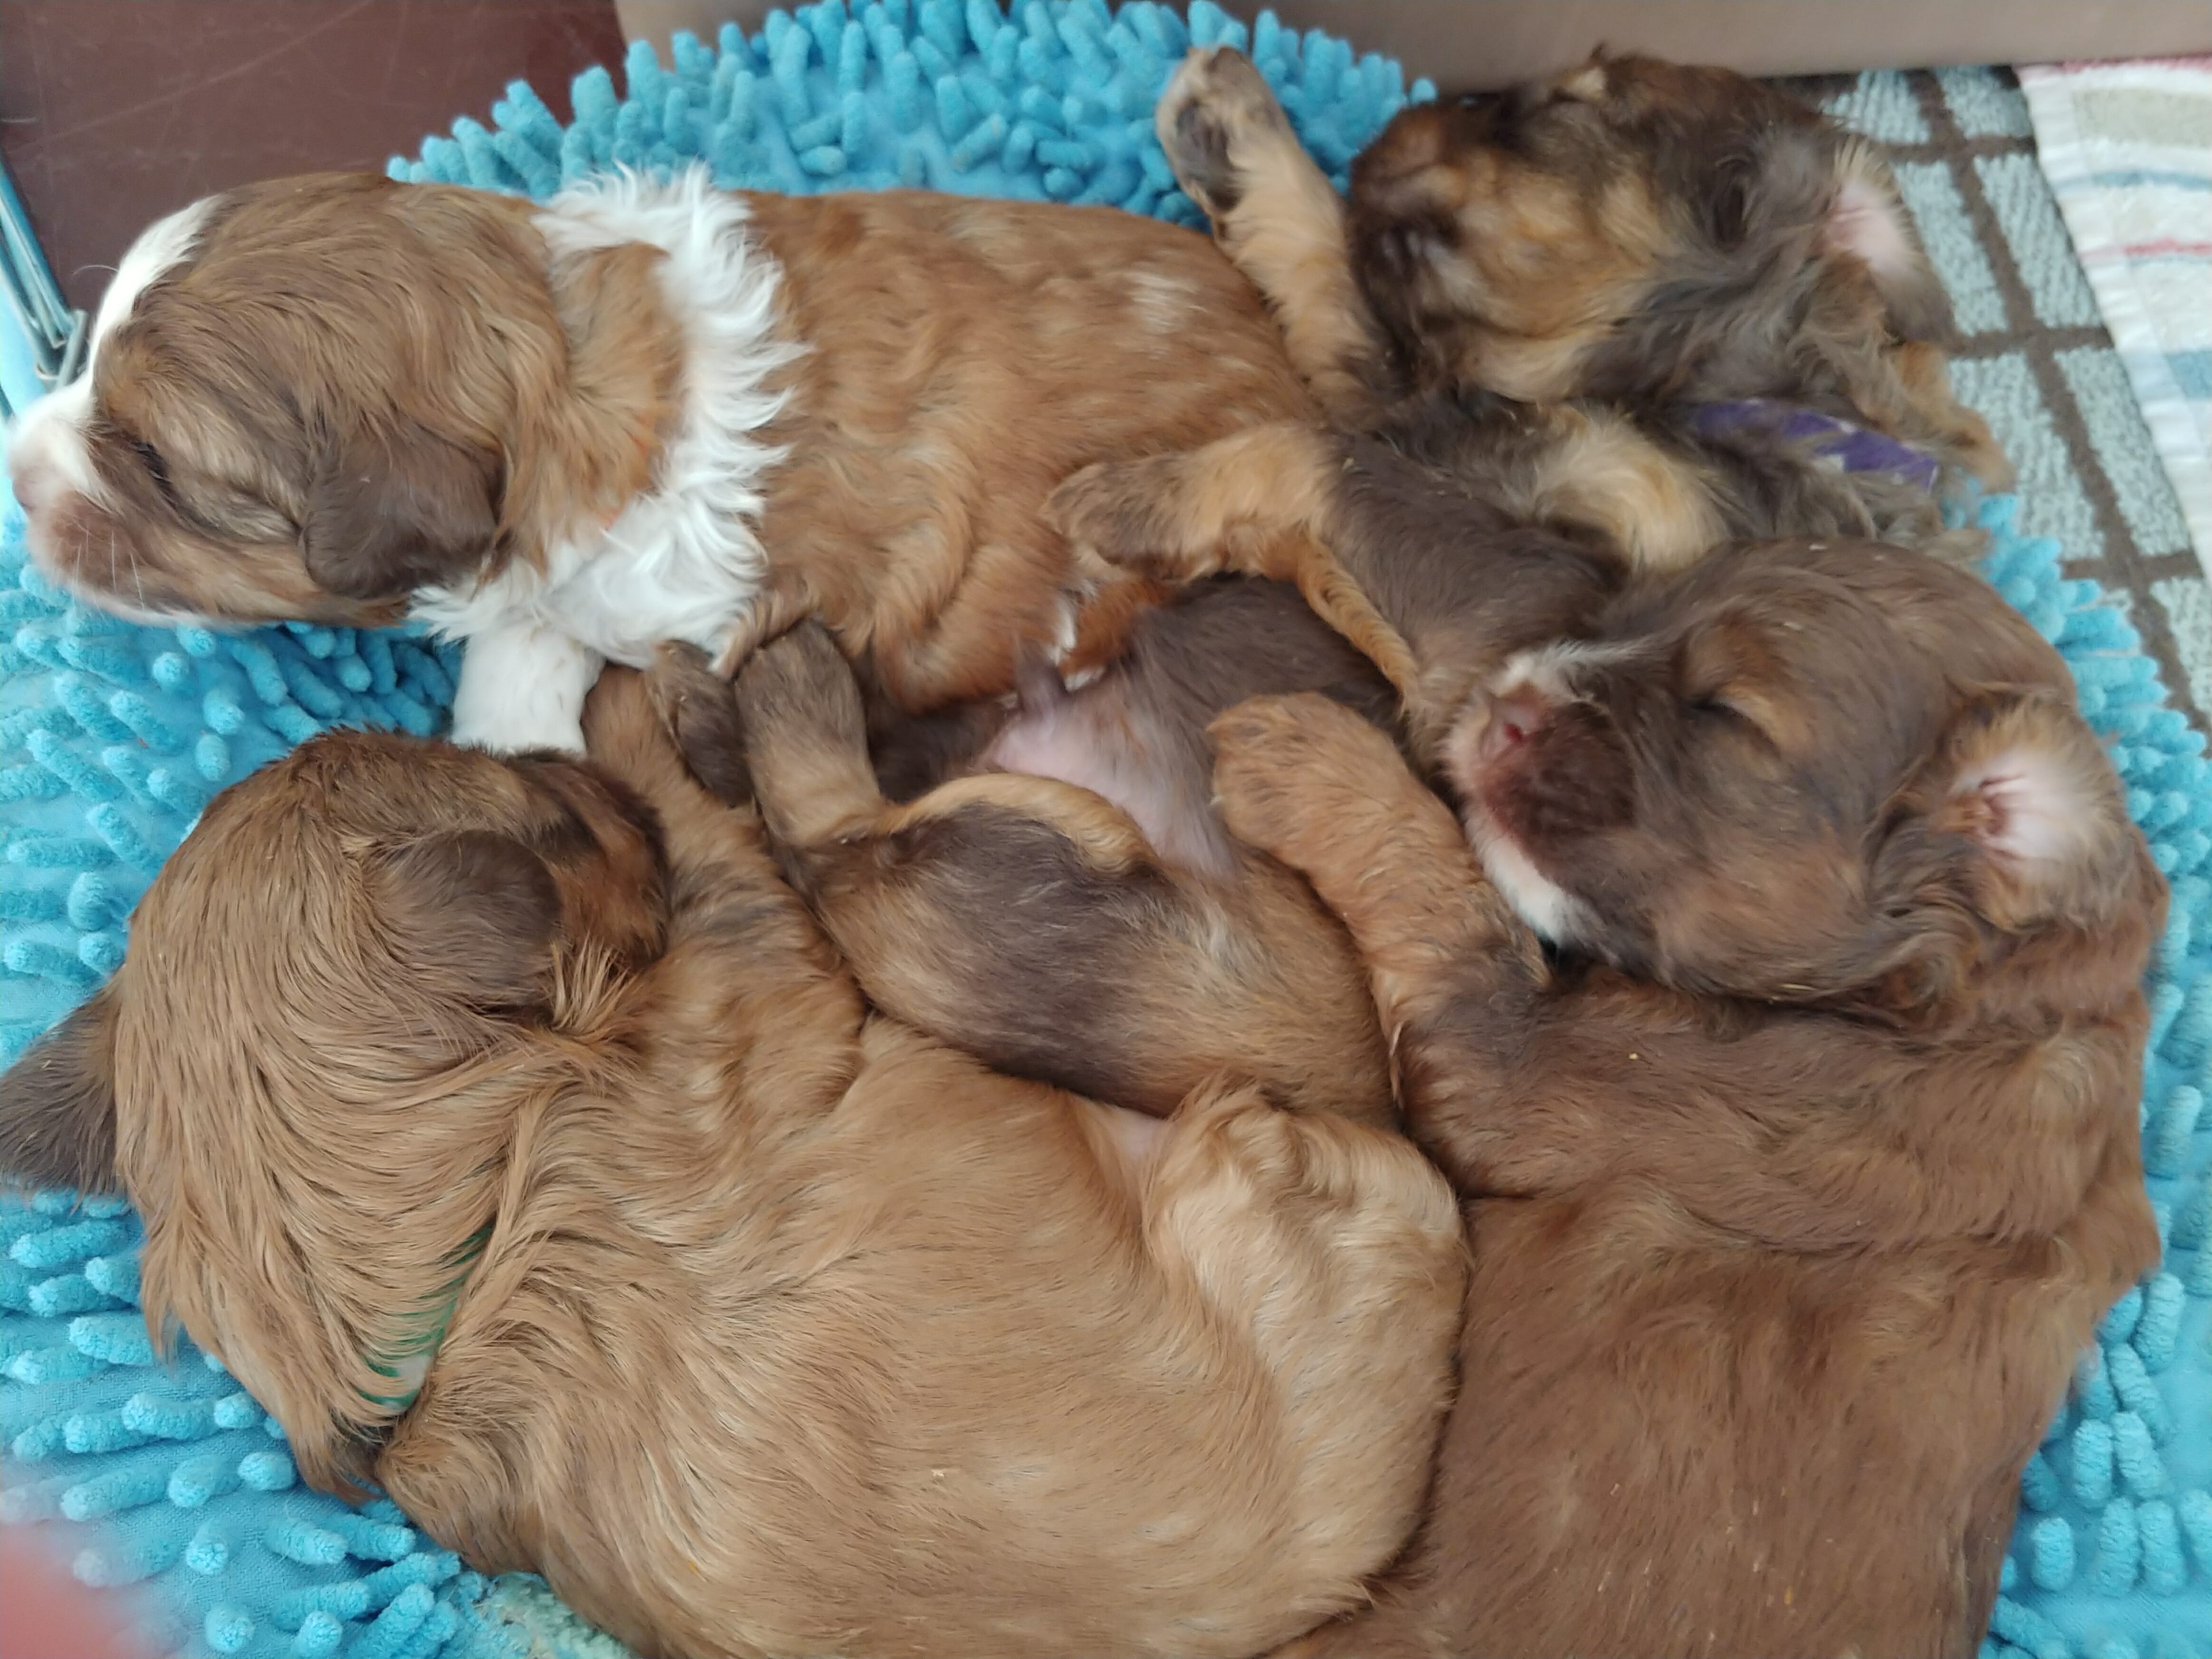 4 labradoodle puppies all curled and snuggled in their bed